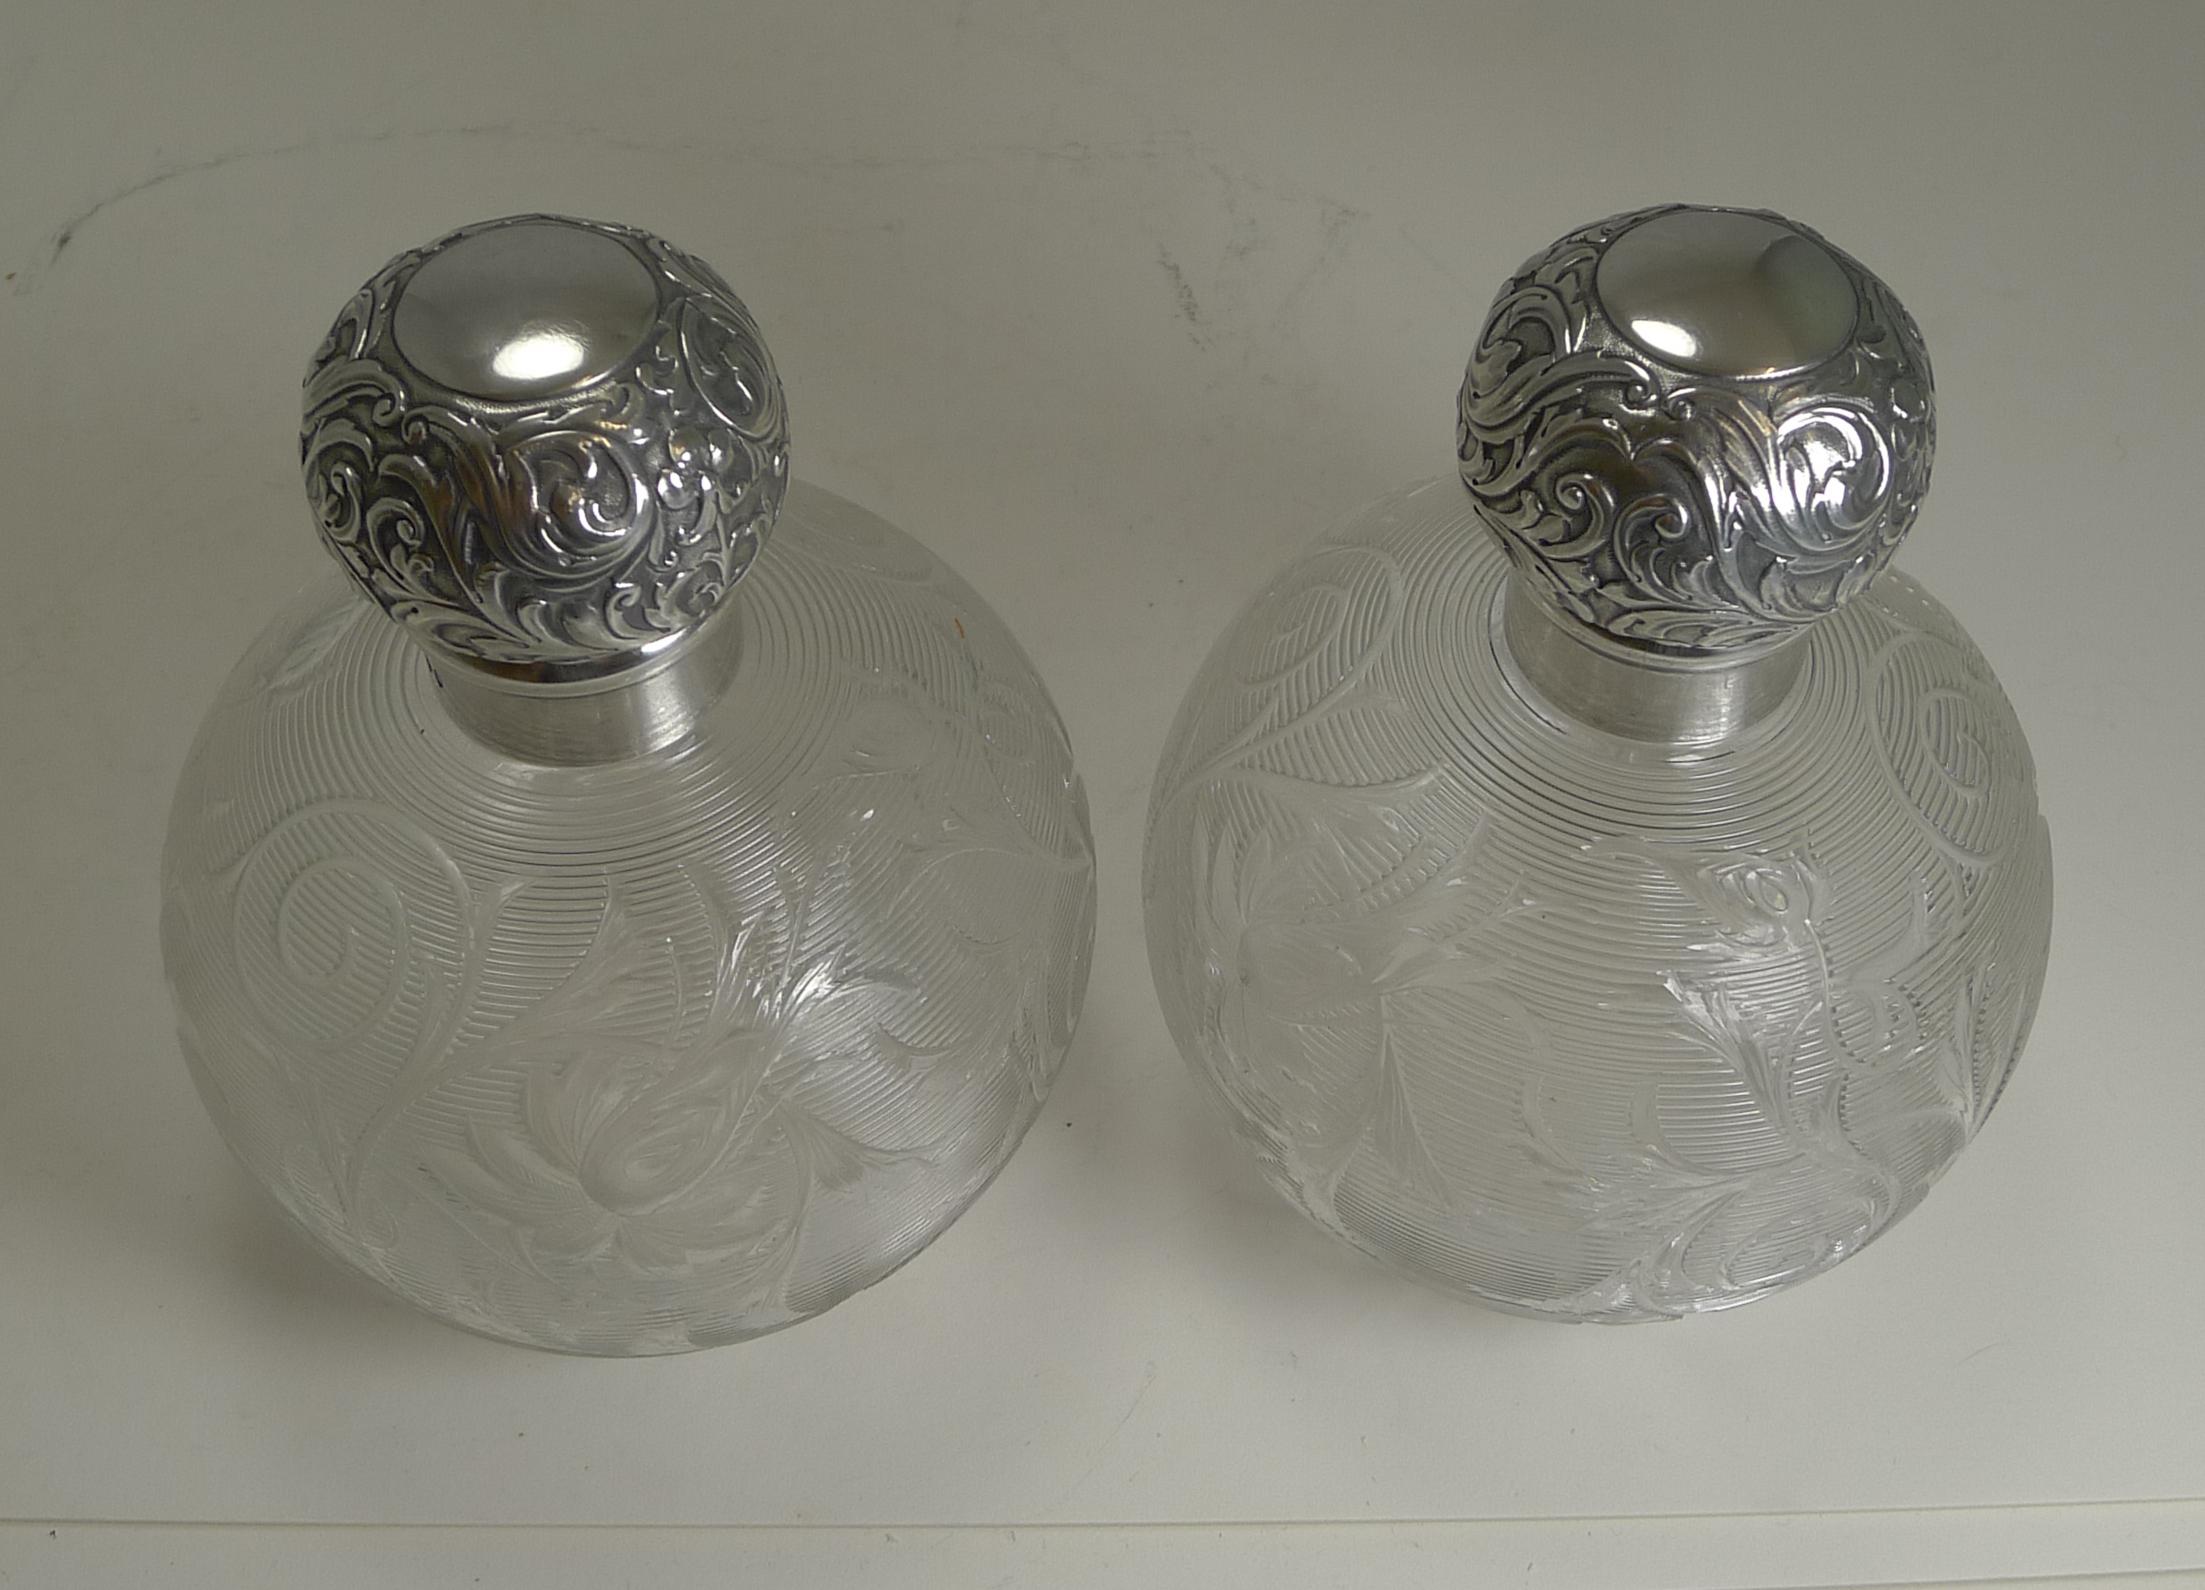 Finest Pair of Antique English Sterling Topped Perfume Bottles by Asprey, London 3